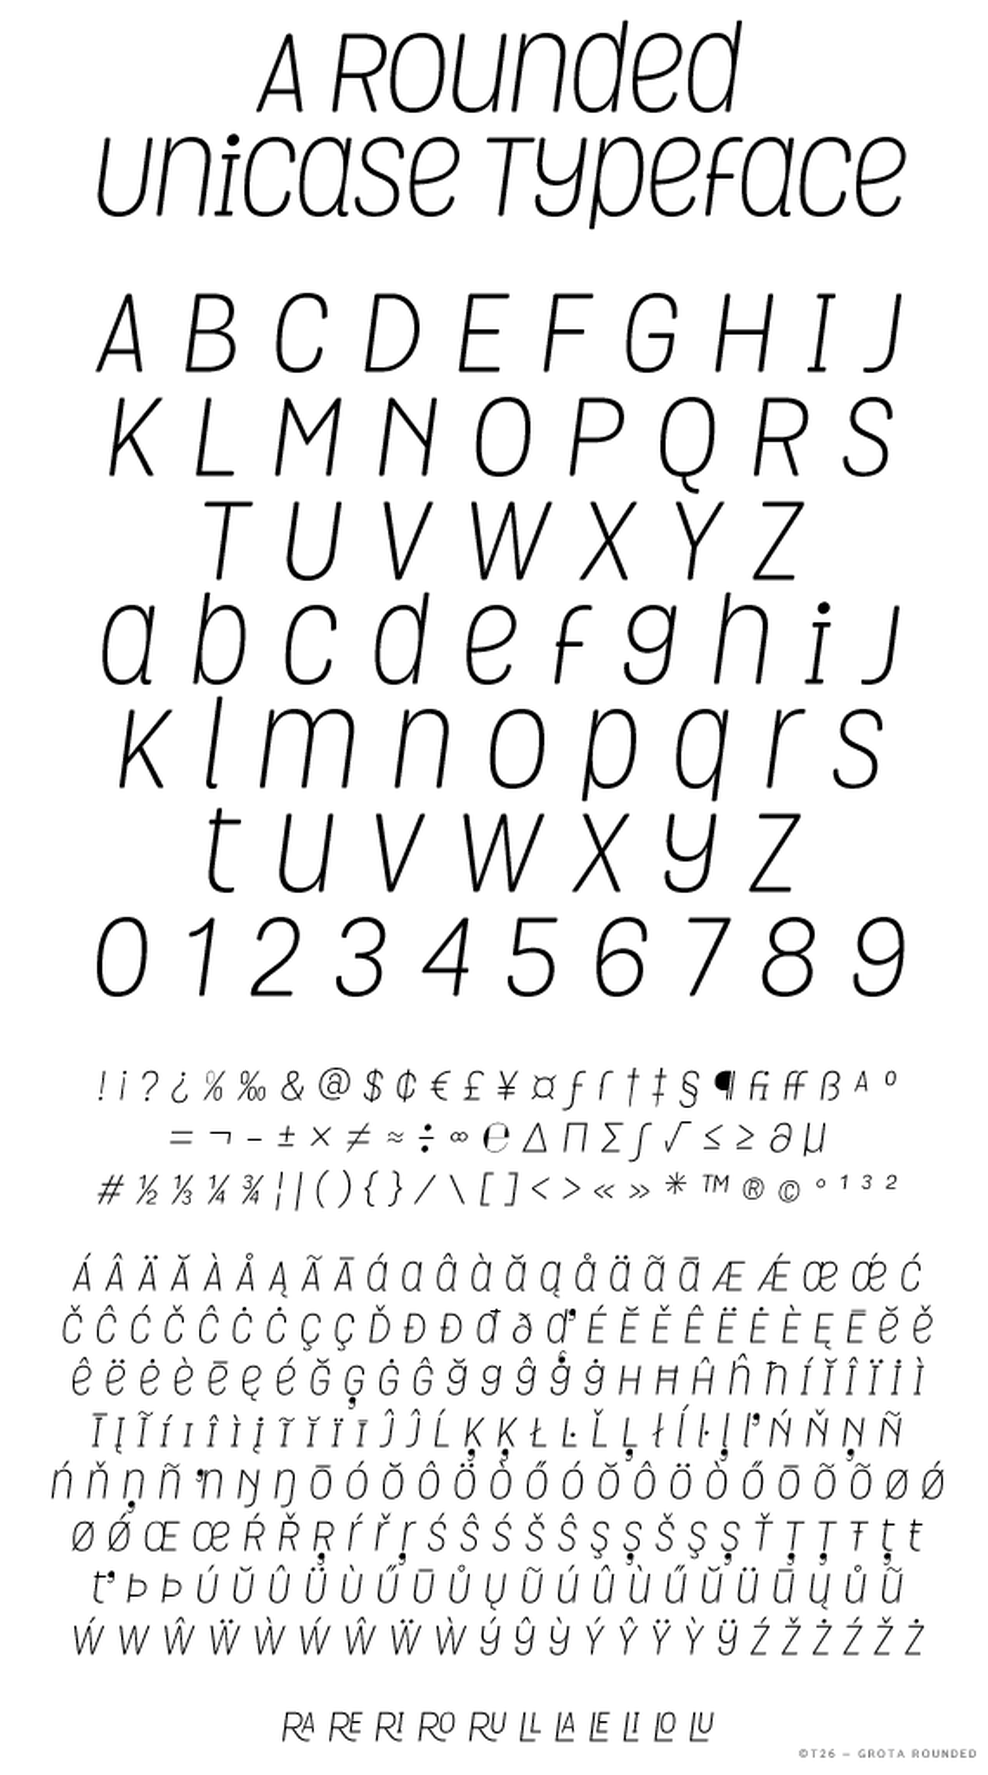 T 26 Digital Type Foundry Fonts Grota Rounded